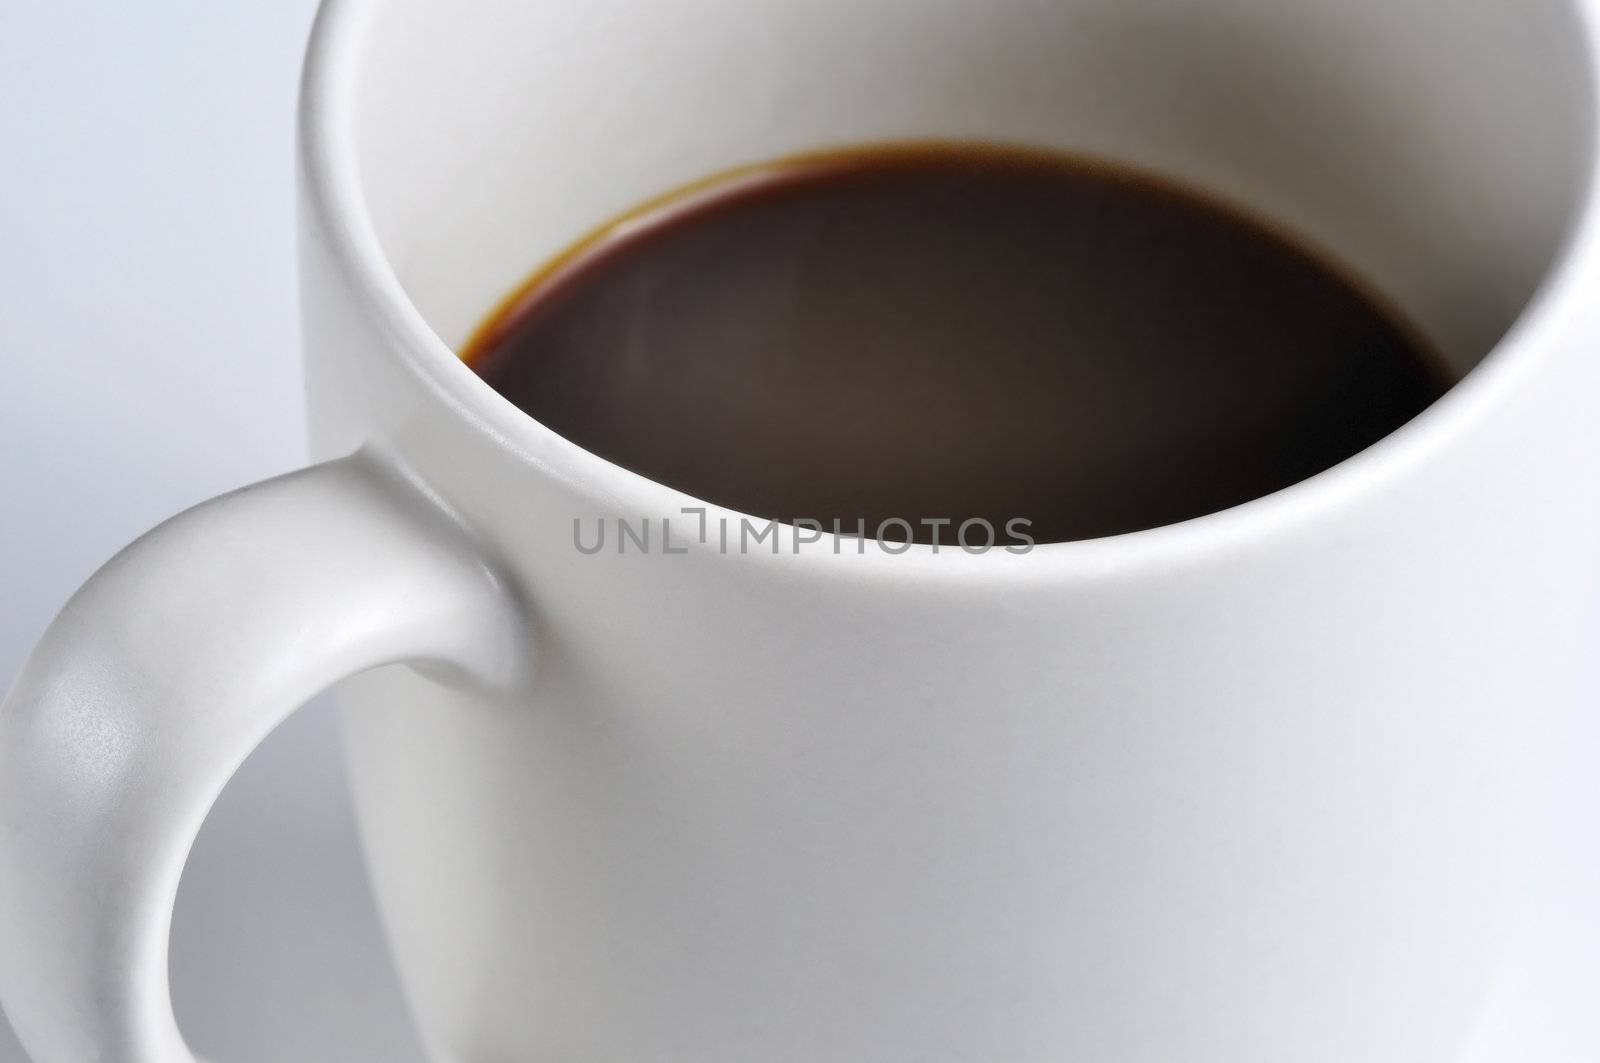 Coffee cup with coffee in a light grey background, soft focus, some grain added